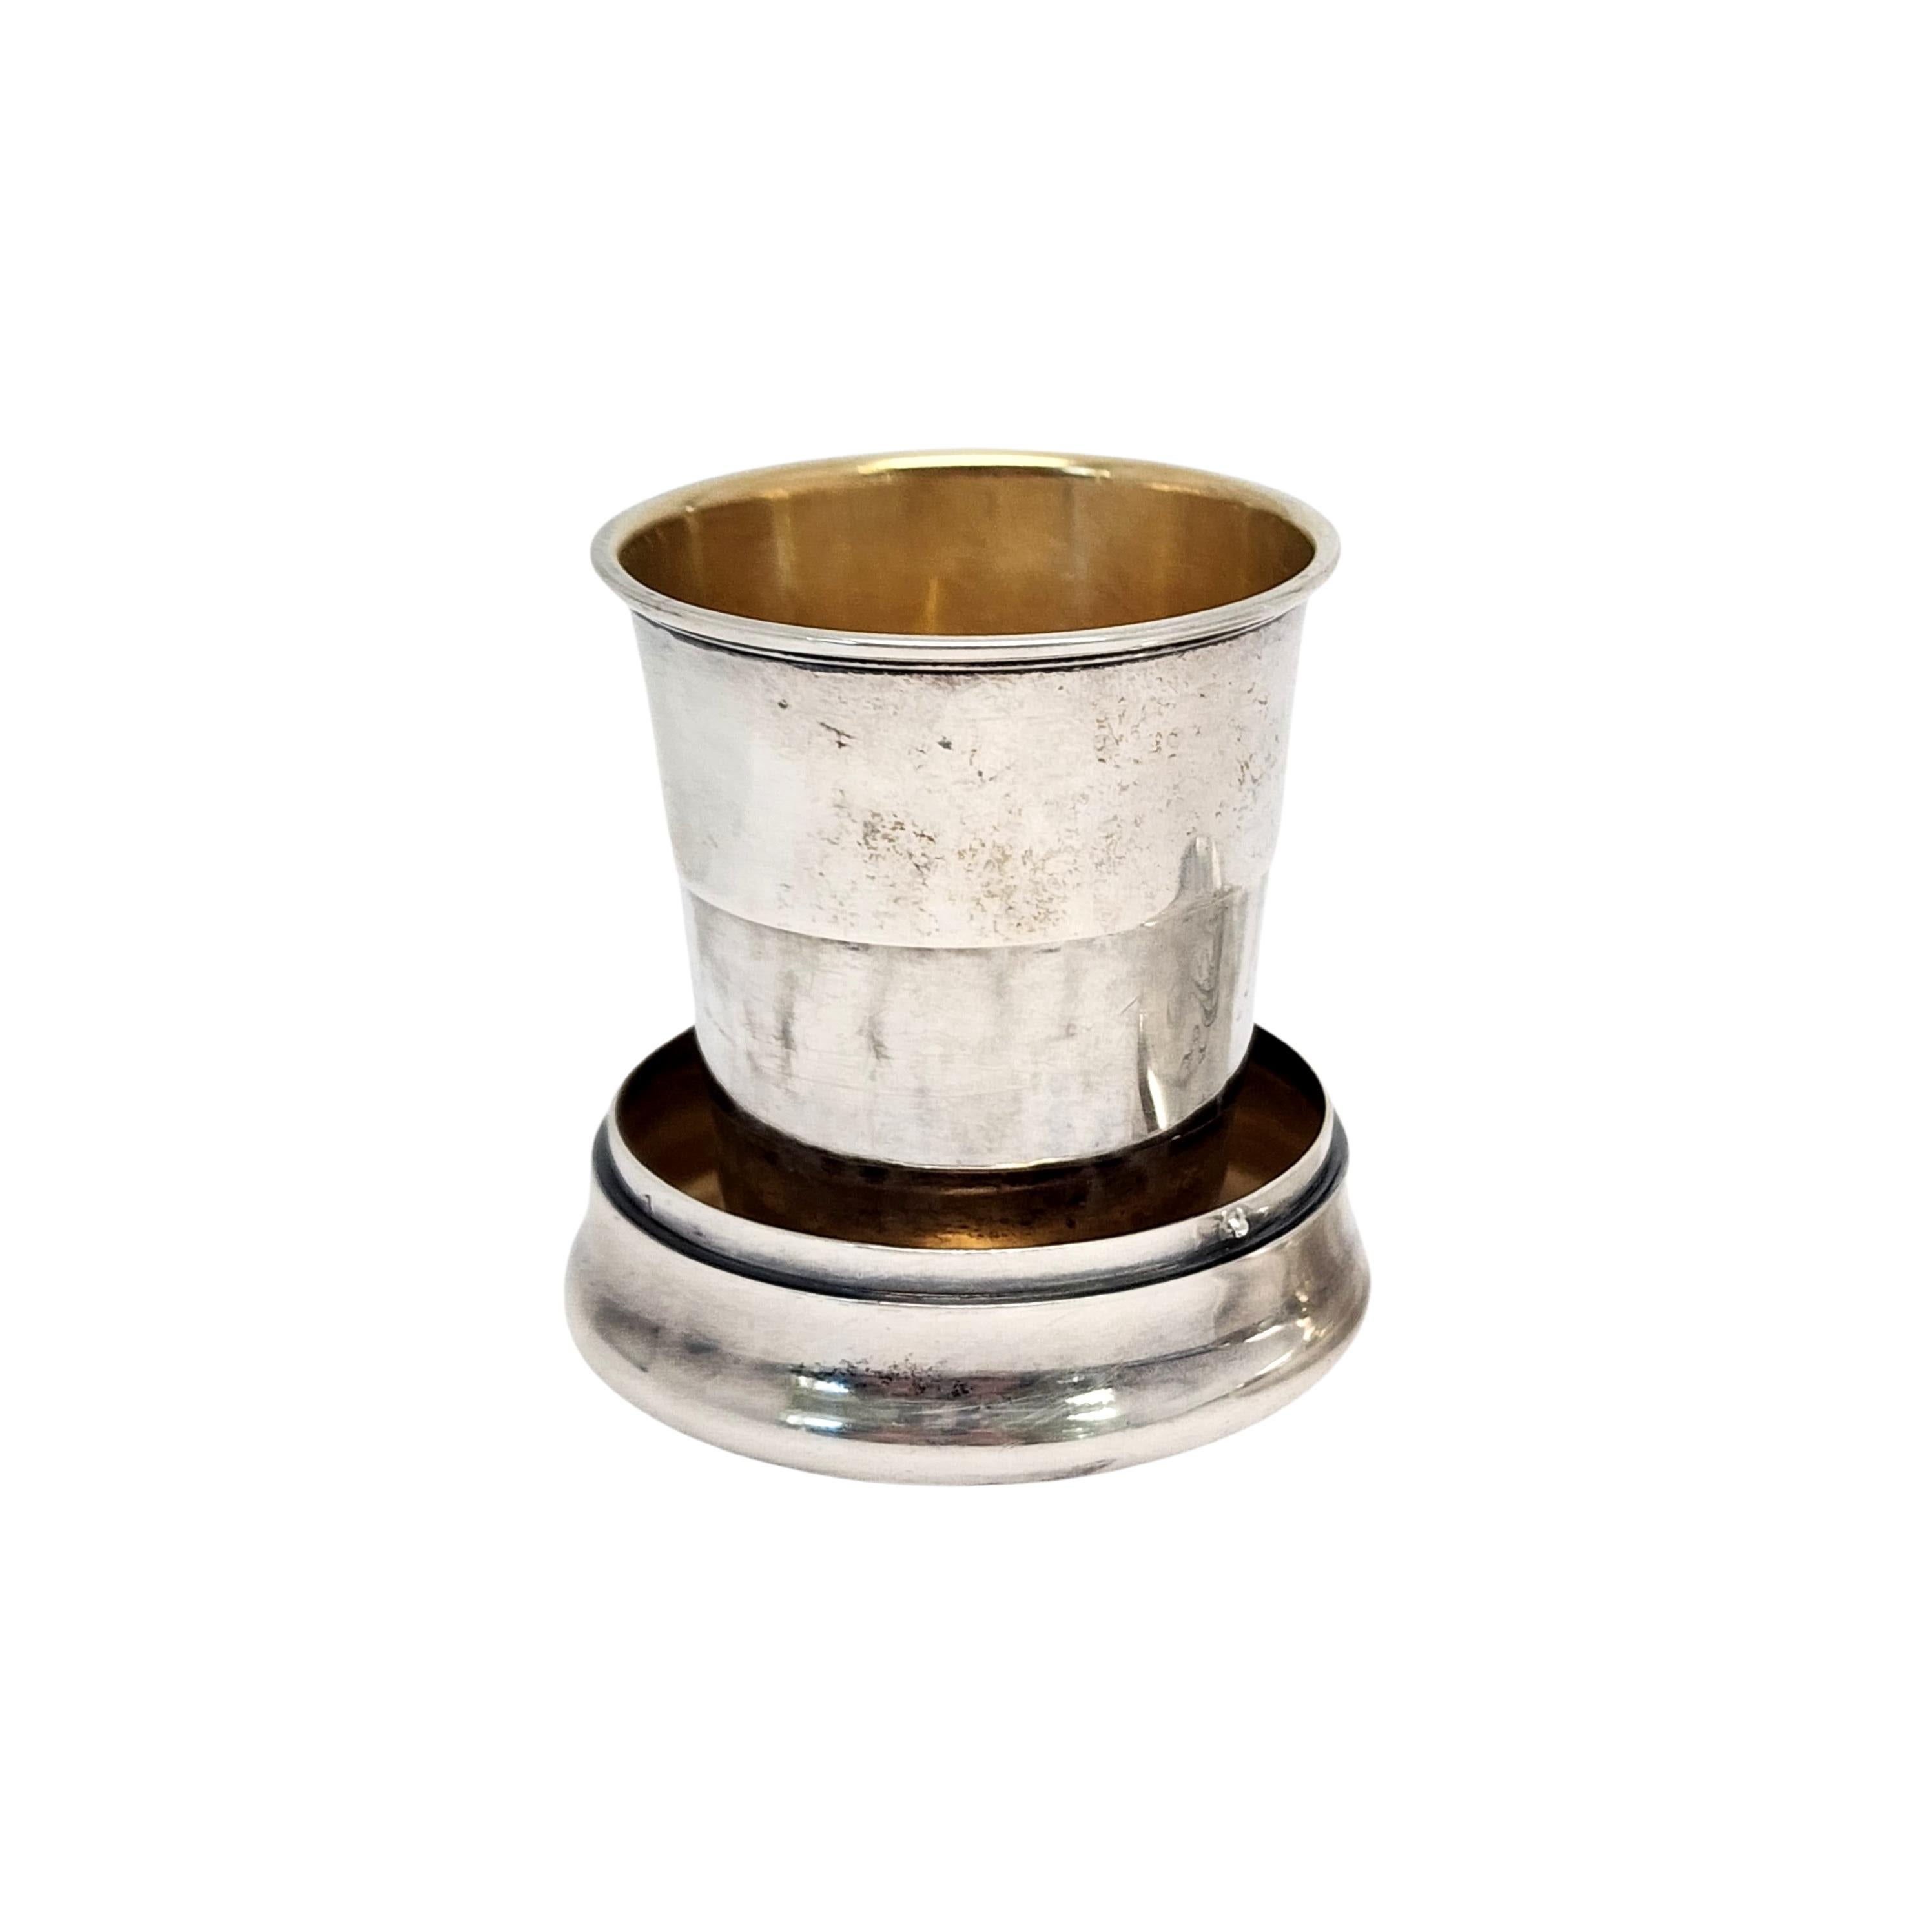 George Shiebler Sterling Silver Collapsible Travel Cup Gold Wash Interior 5